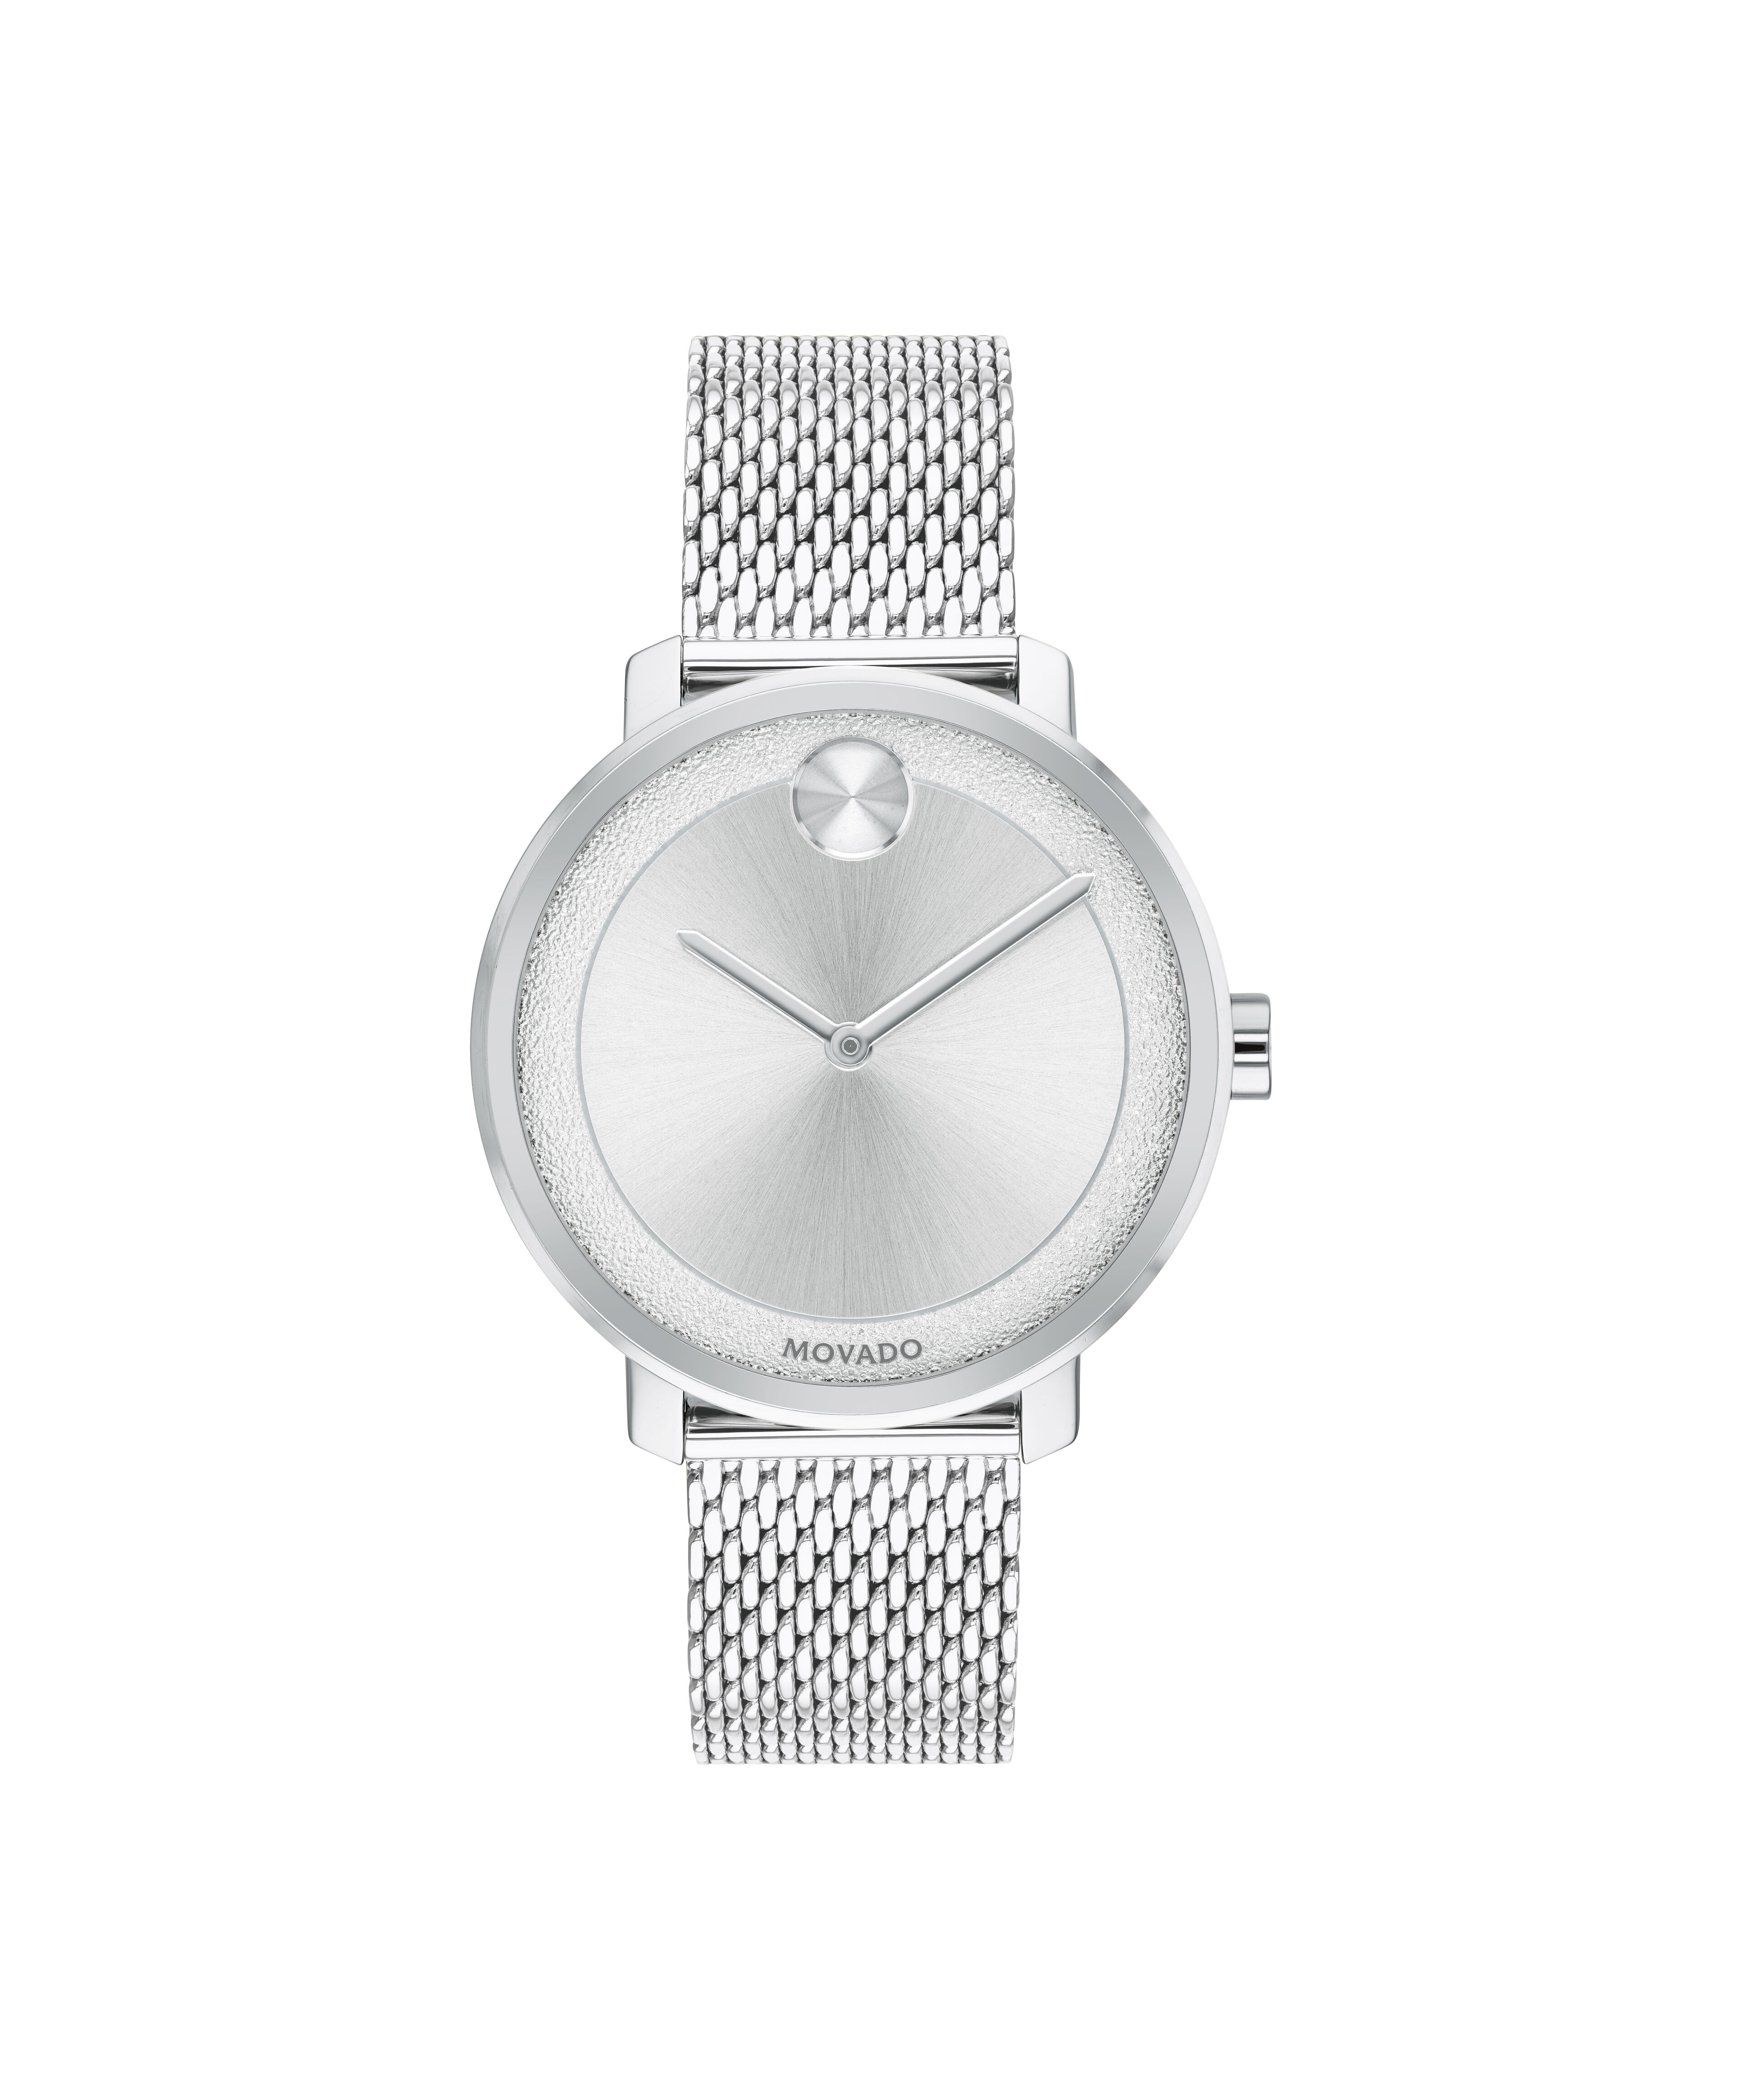 Movado Concerto Gold Diamond Dial Women's Watch 0606791Movado Concerto Ladies, White Mother of Pearl Dial - Steel